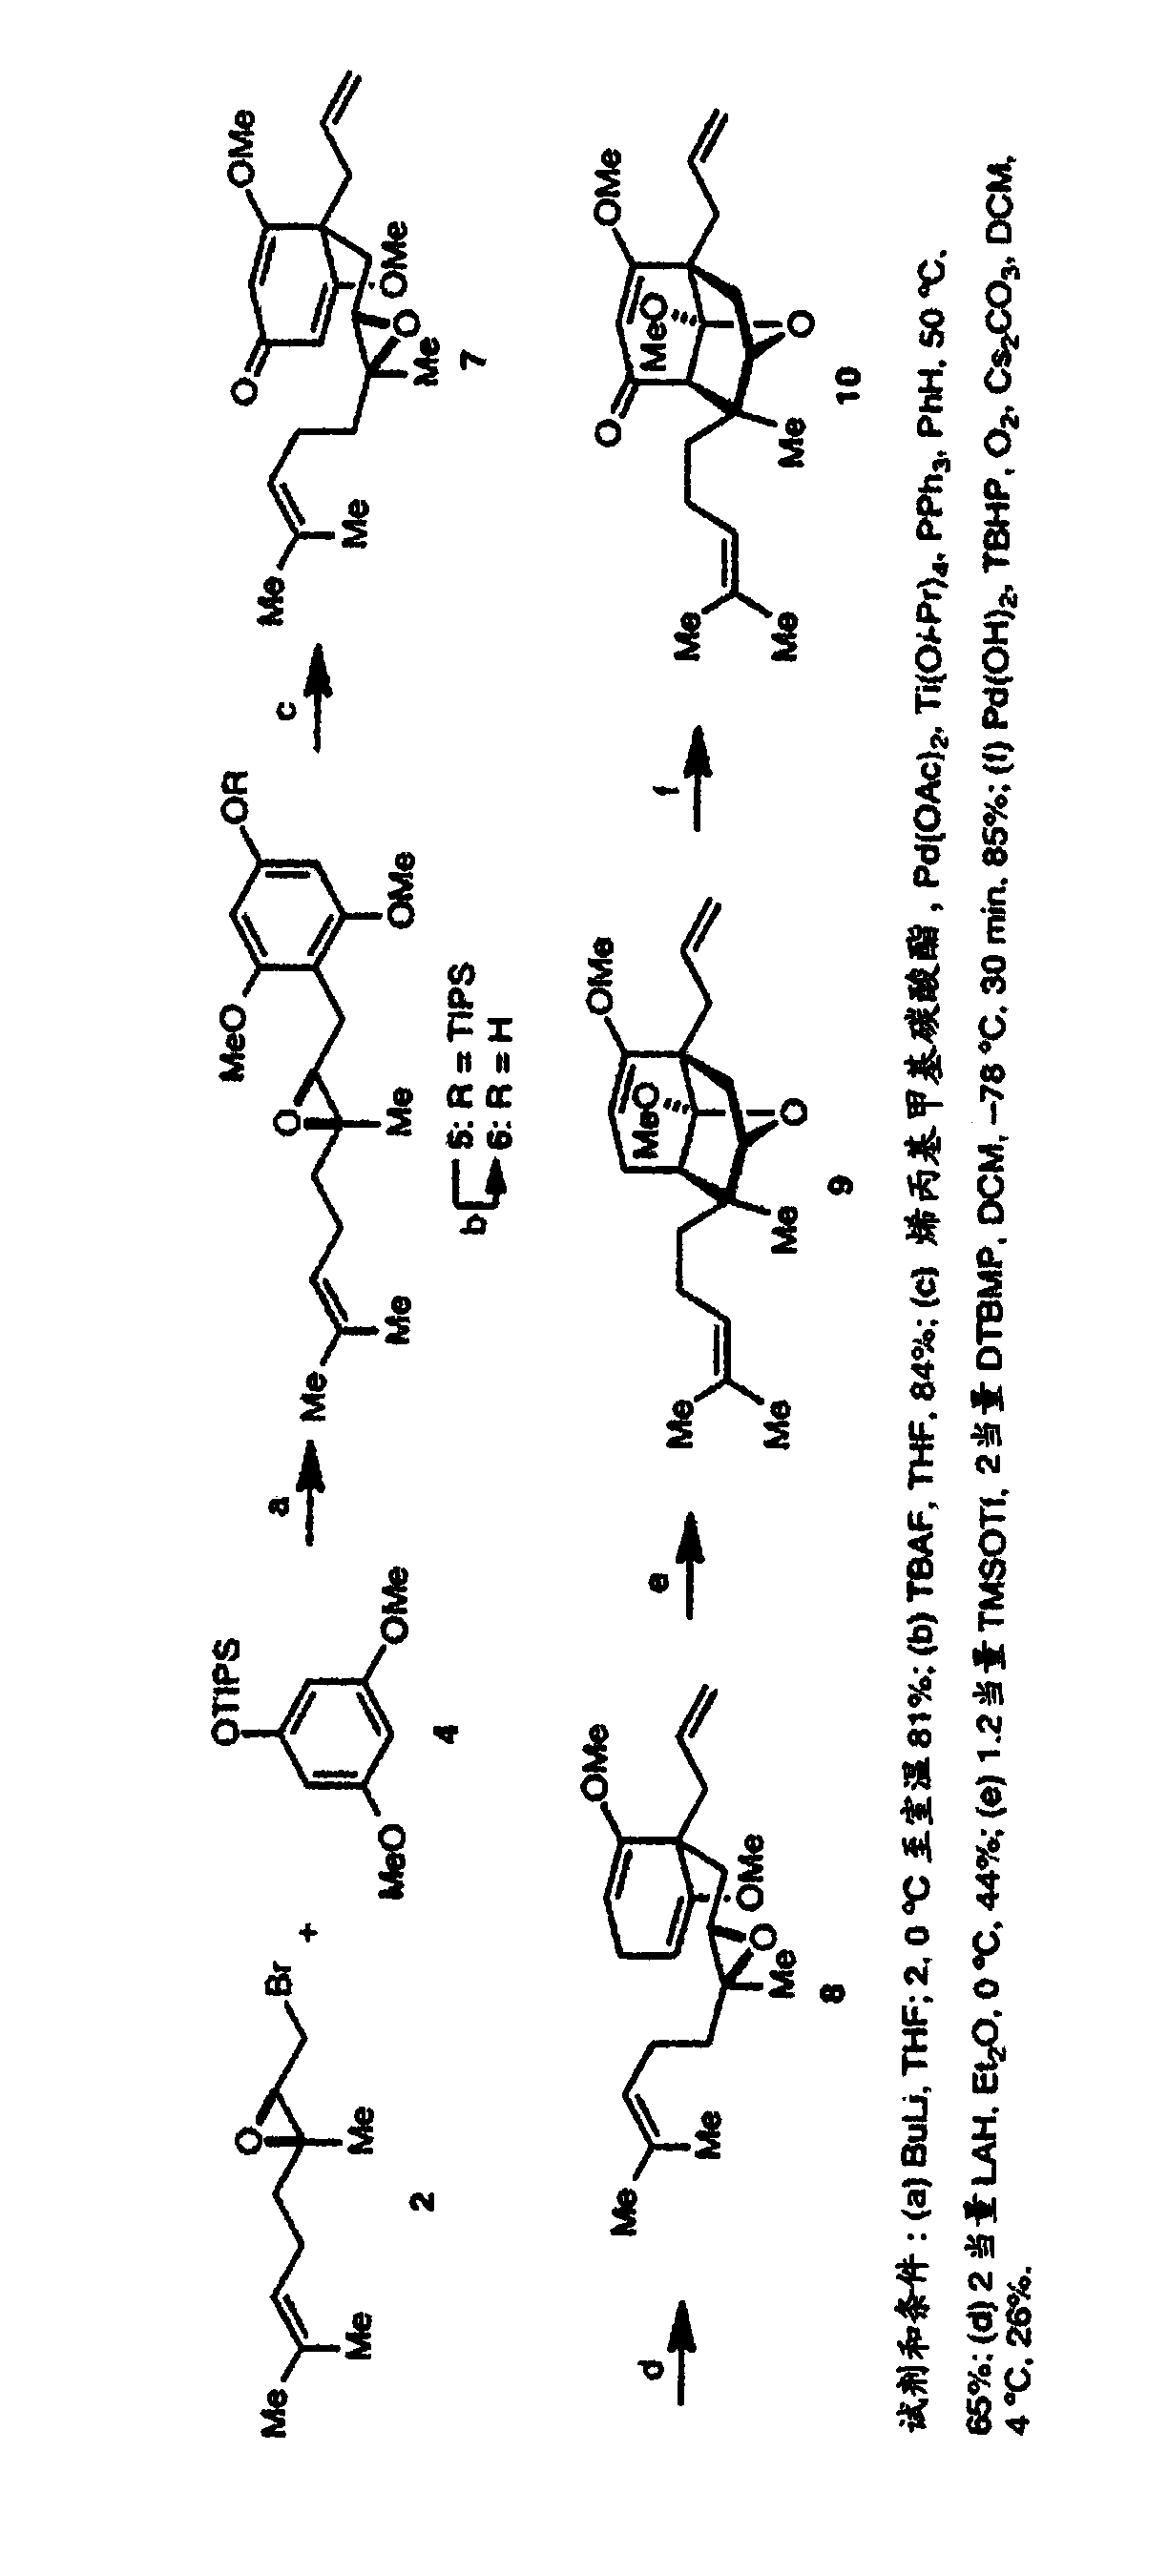 Hyperforin analogs, methods of synthesis, and uses thereof